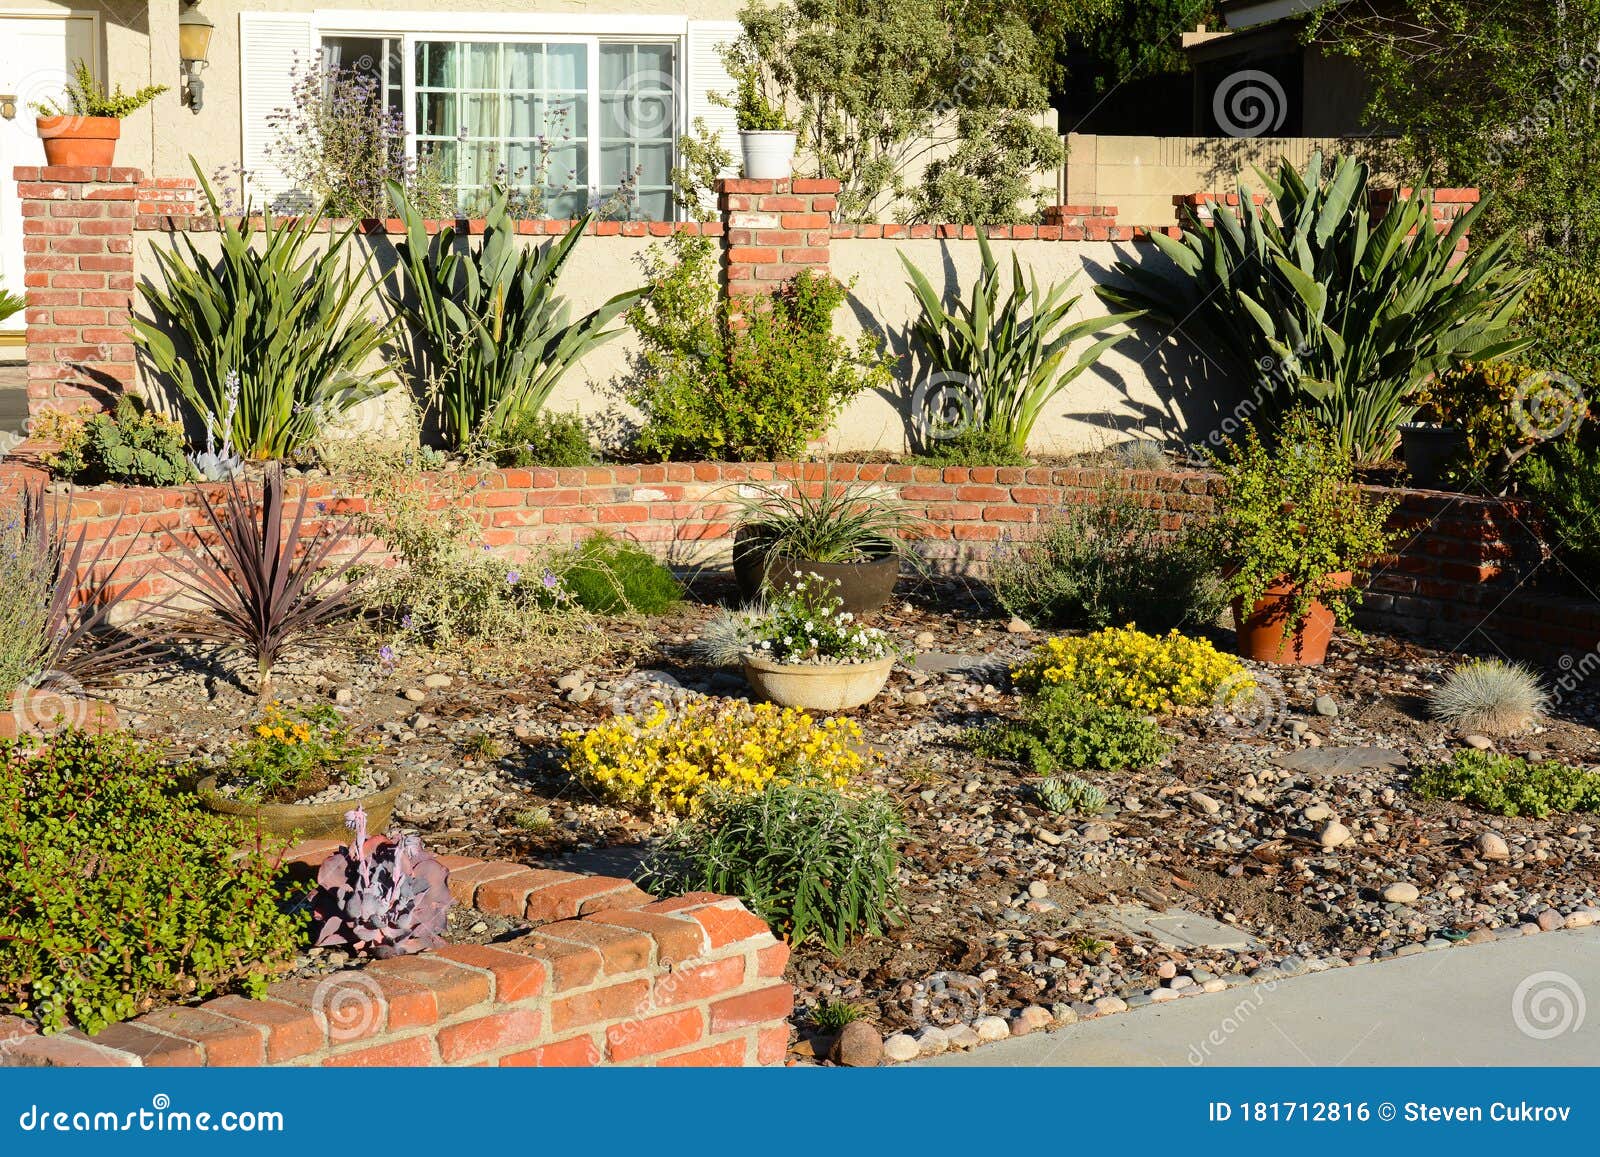 a-southern-california-water-wise-residential-garden-featuring-native